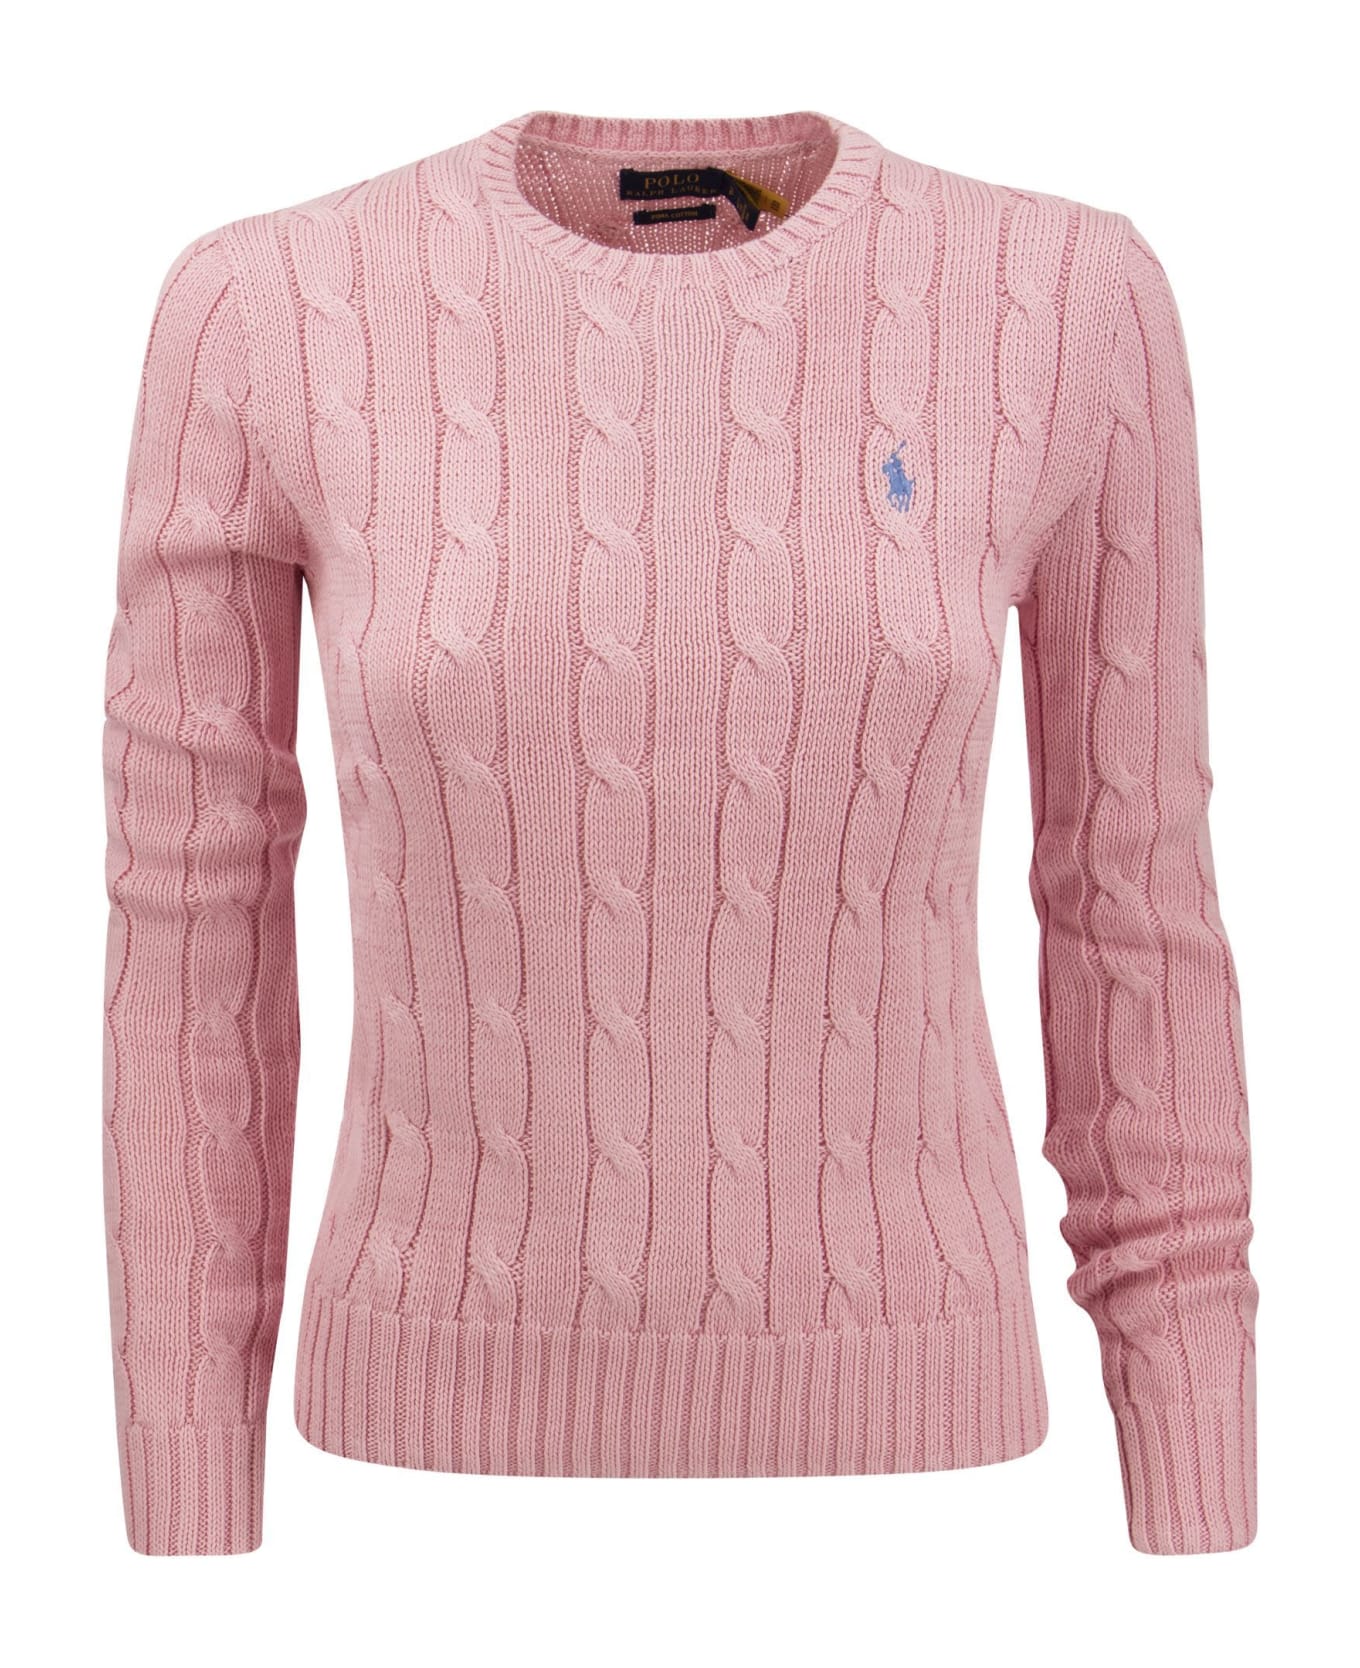 Polo Ralph Lauren Crew Neck Sweater In Pink Braided Knit - Pink